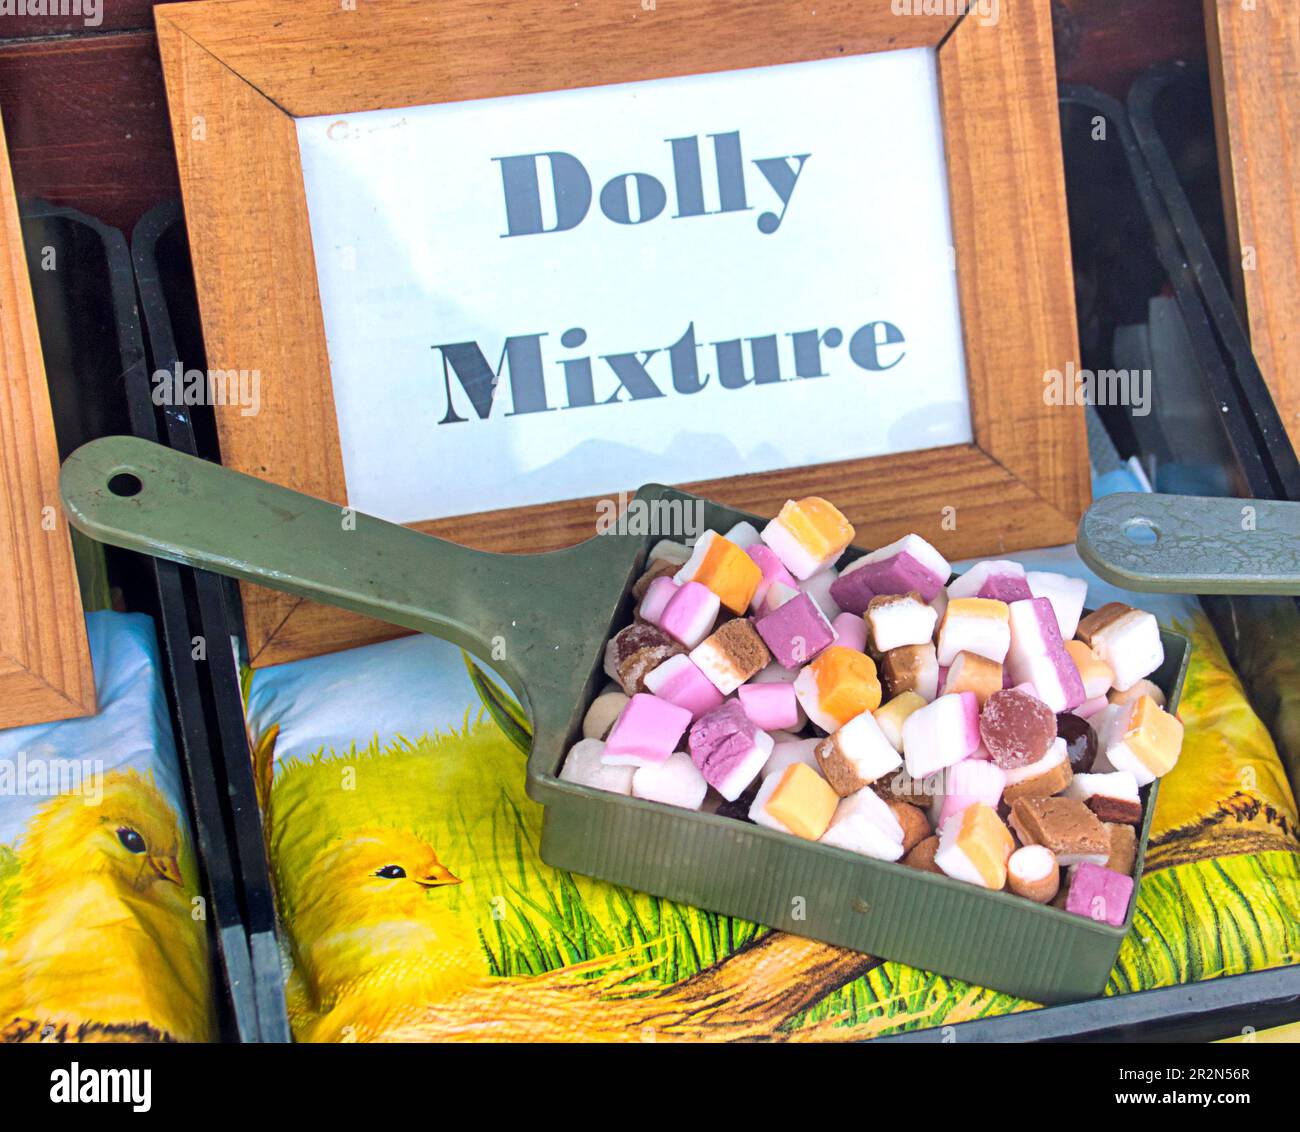 dolly mixtures Scottish traditional candy or sweets aimed at tourists and older people from their childhood Stock Photo